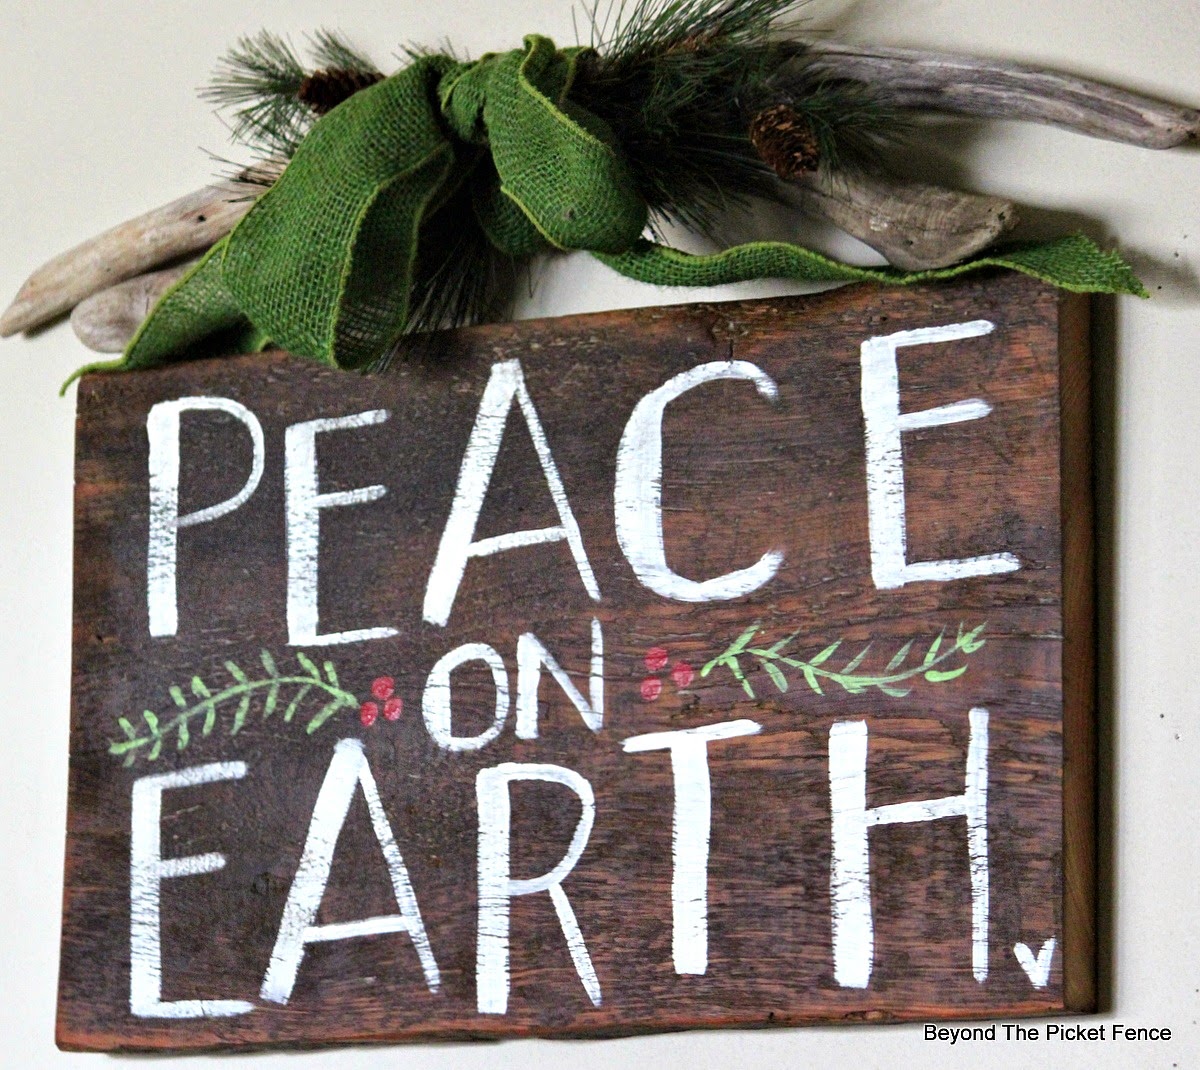 Hand Lettered Peace on Earth sign http://bec4-beyondthepicketfence.blogspot.com/2014/11/12-days-of-christmas-kick-off-with.html